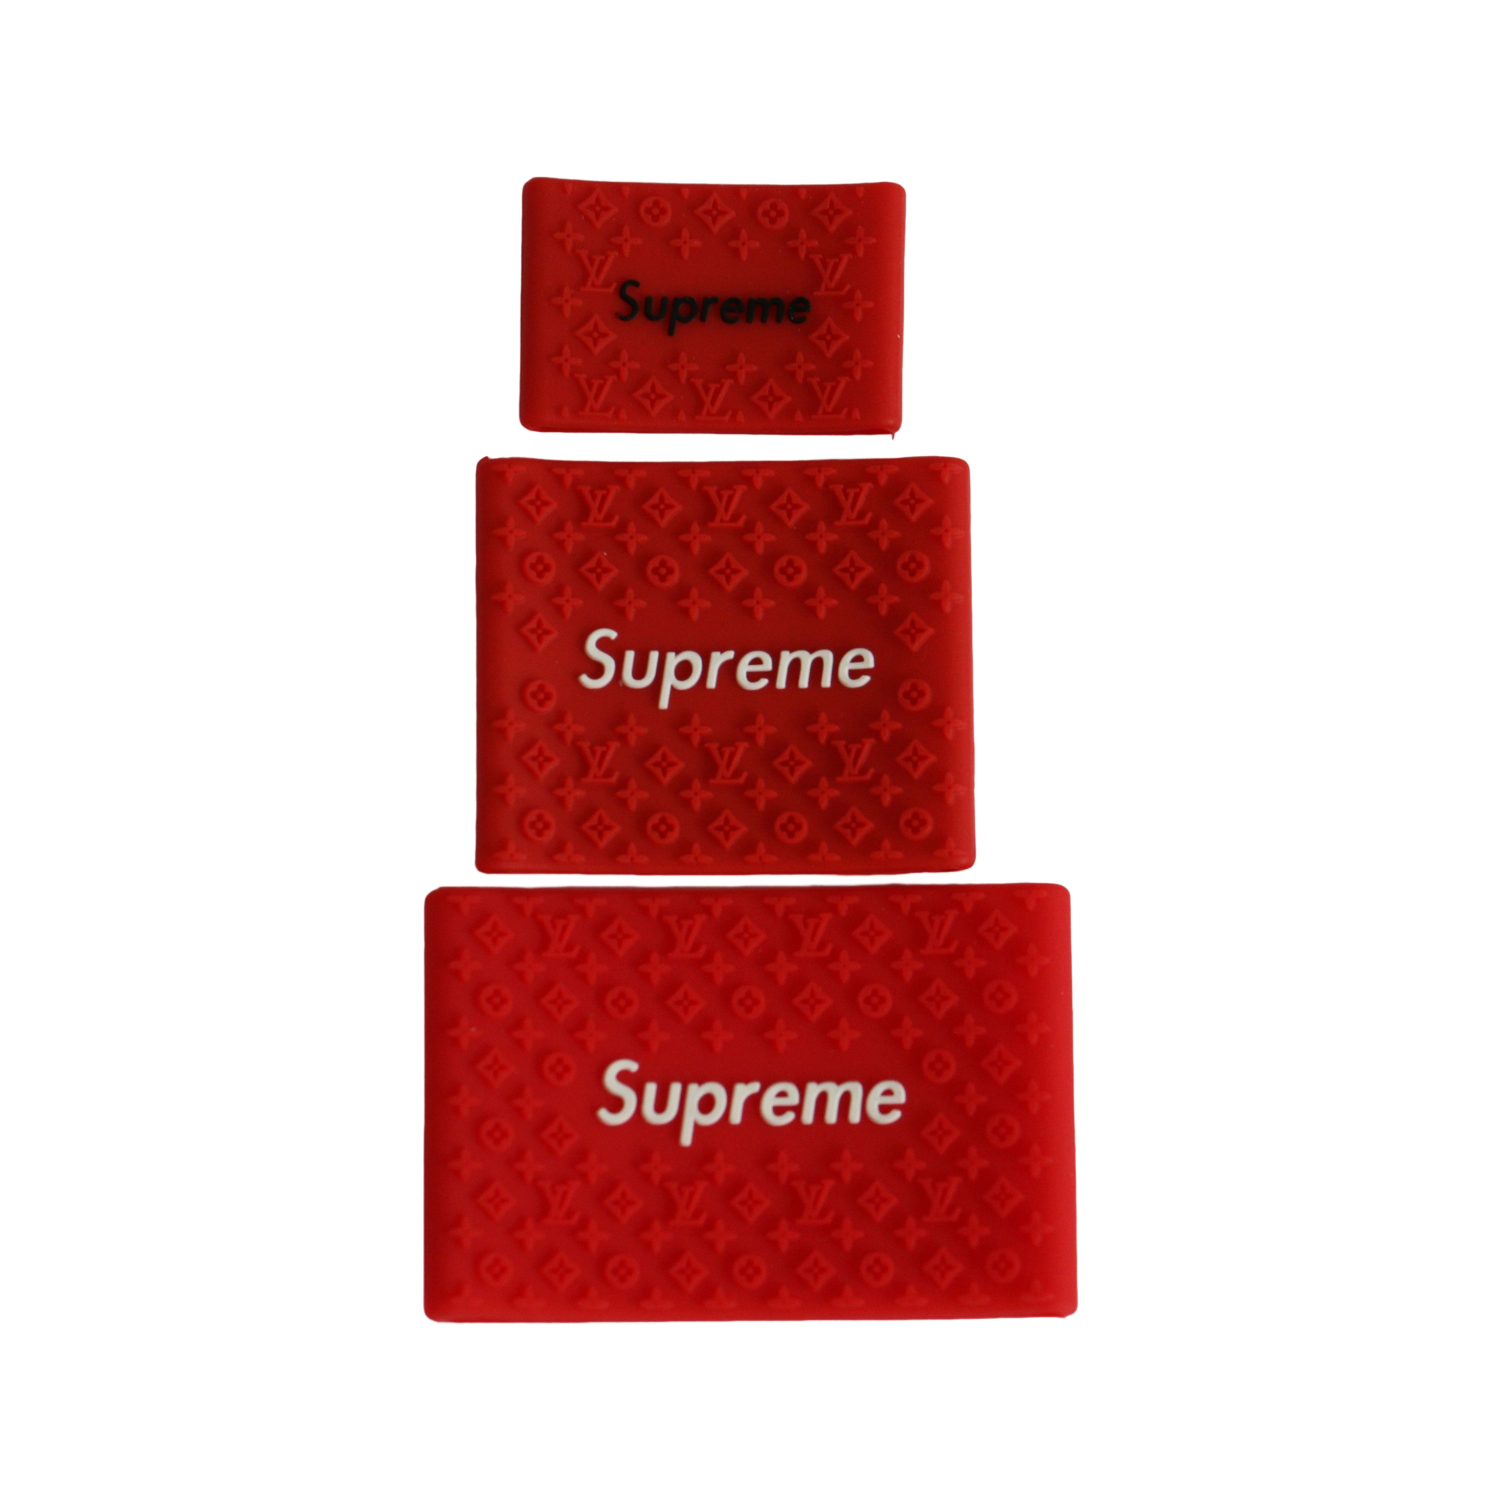 Supreme Clipper Grips Includes Medium and Large Grippers – SD